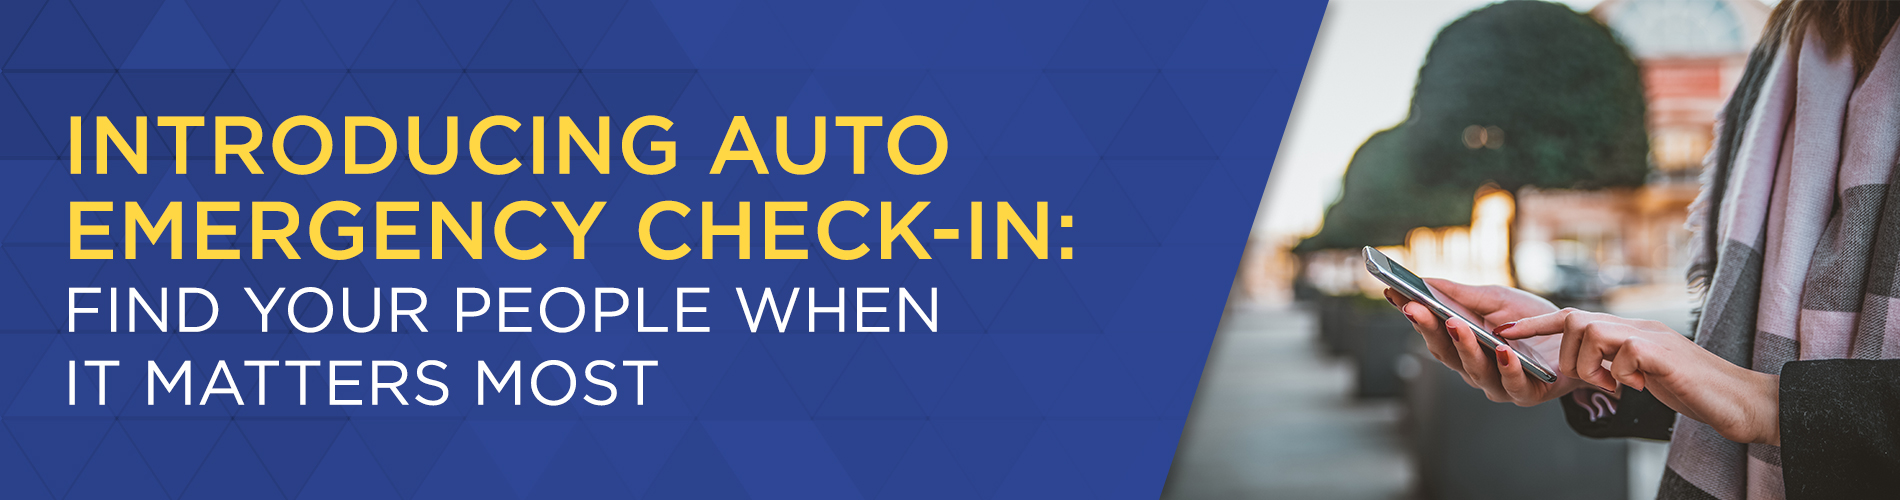 Auto Emergency Check-In helps find your people when it matters most